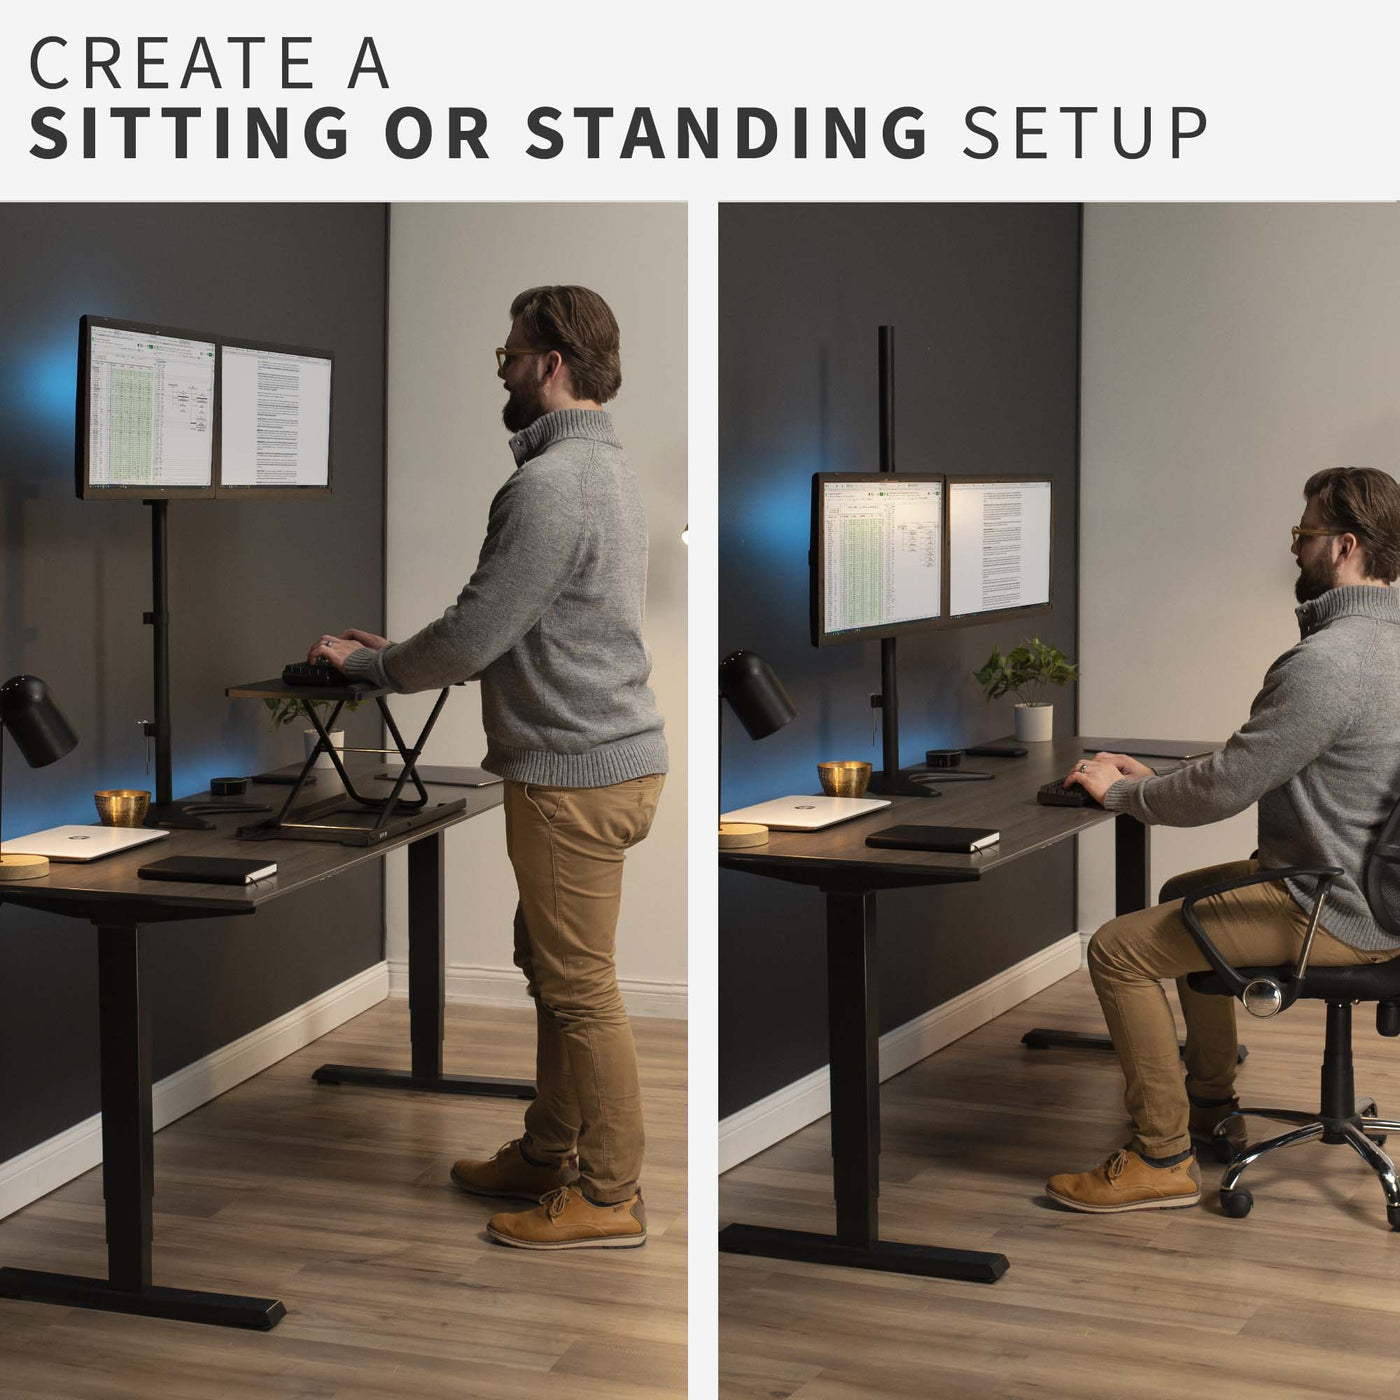 Extra tall sturdy adjustable dual monitor ergonomic desk stand for sit or stand office workstation.